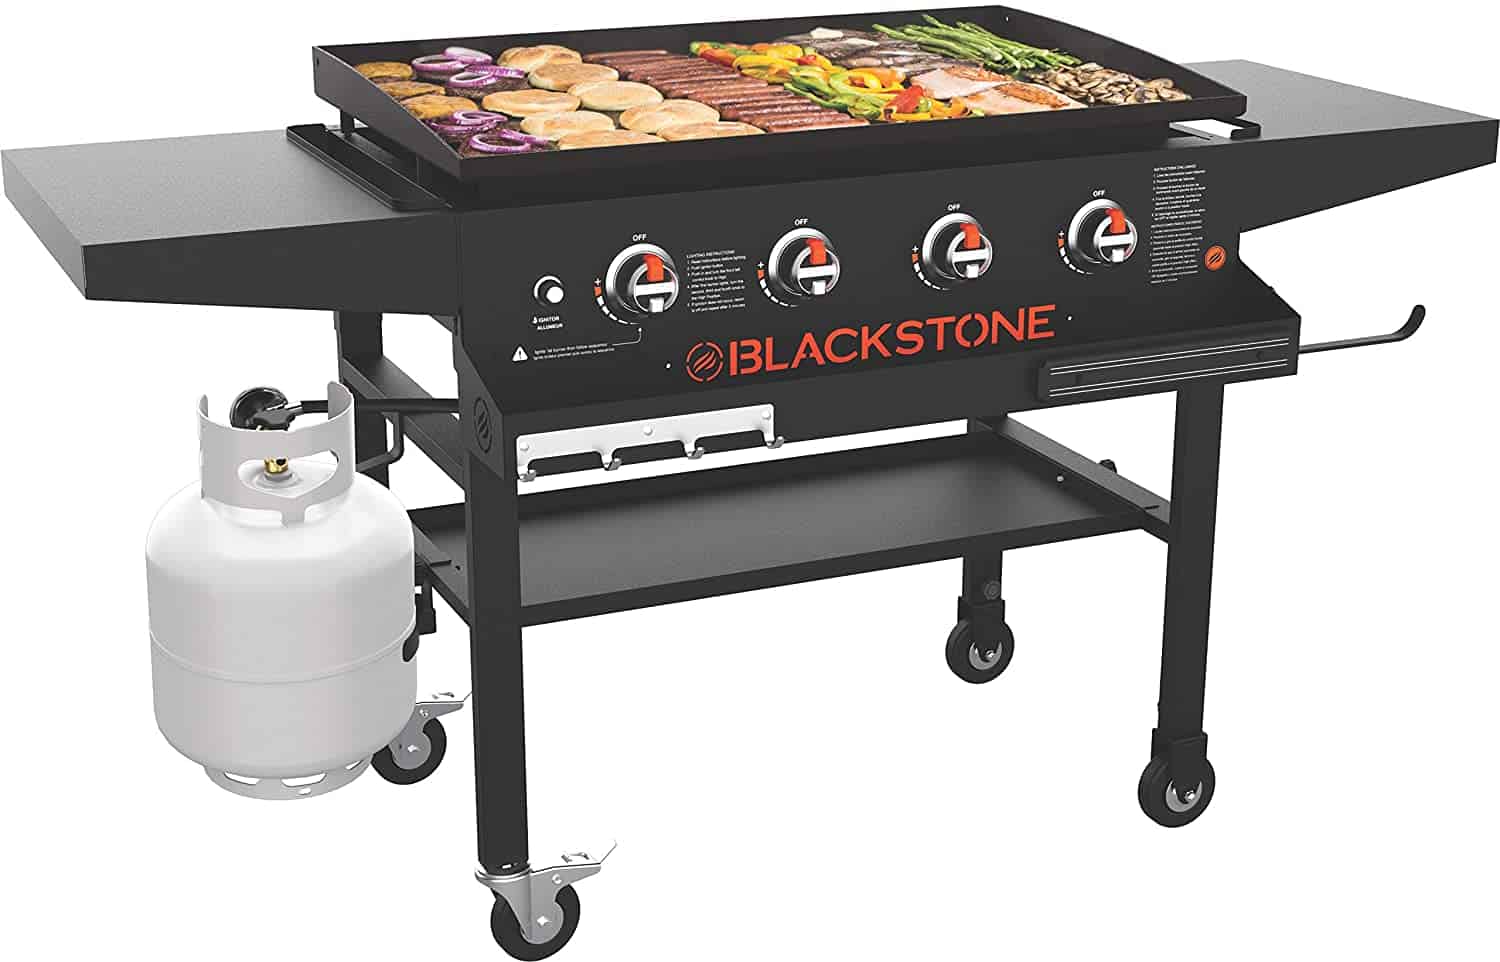 Best overall outdoor gas griddle- Blackstone 1984 Original 36 Inch